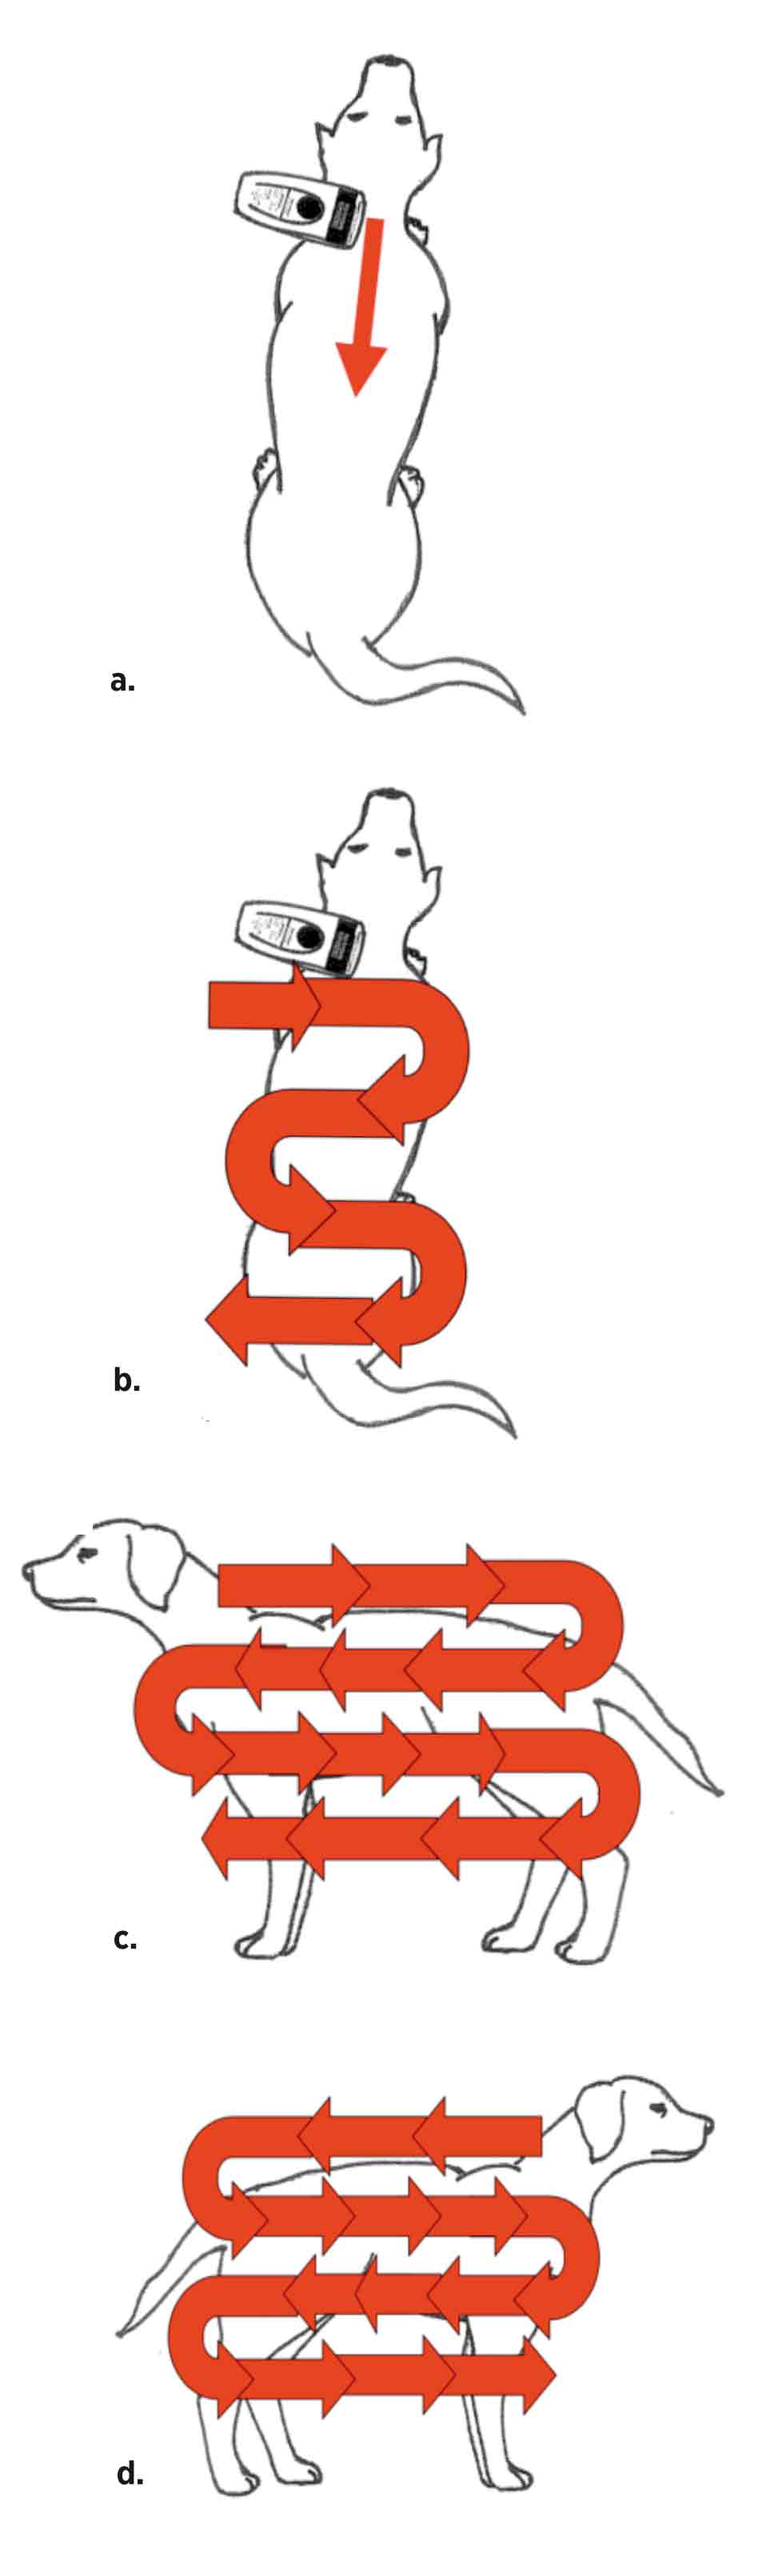 Figure 2. The methodical technique used to locate a microchip in a dog.